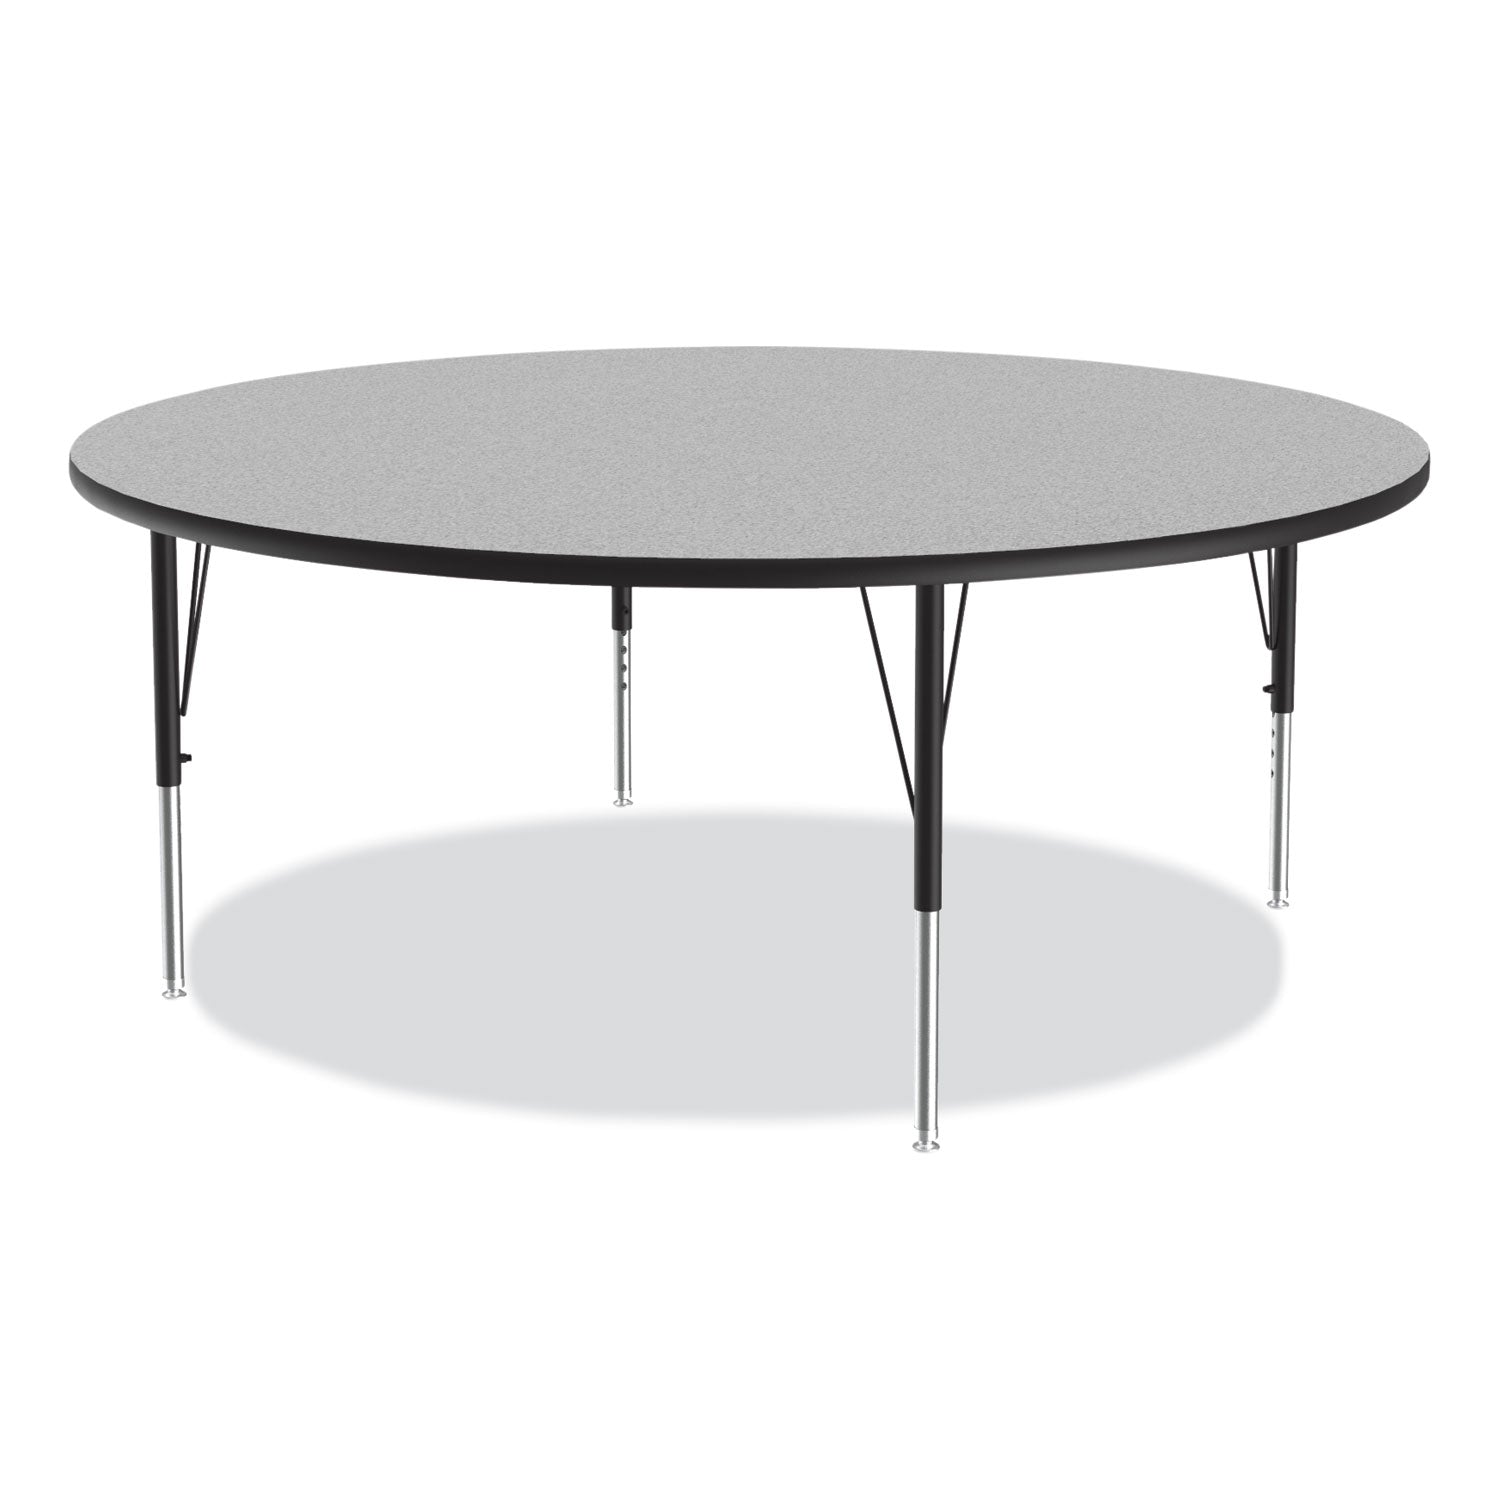 height-adjustable-activity-table-round-60-x-19-to-29-gray-granite-top-black-legs-4-pallet-ships-in-4-6-business-days_crl60tfrd1595k4 - 8